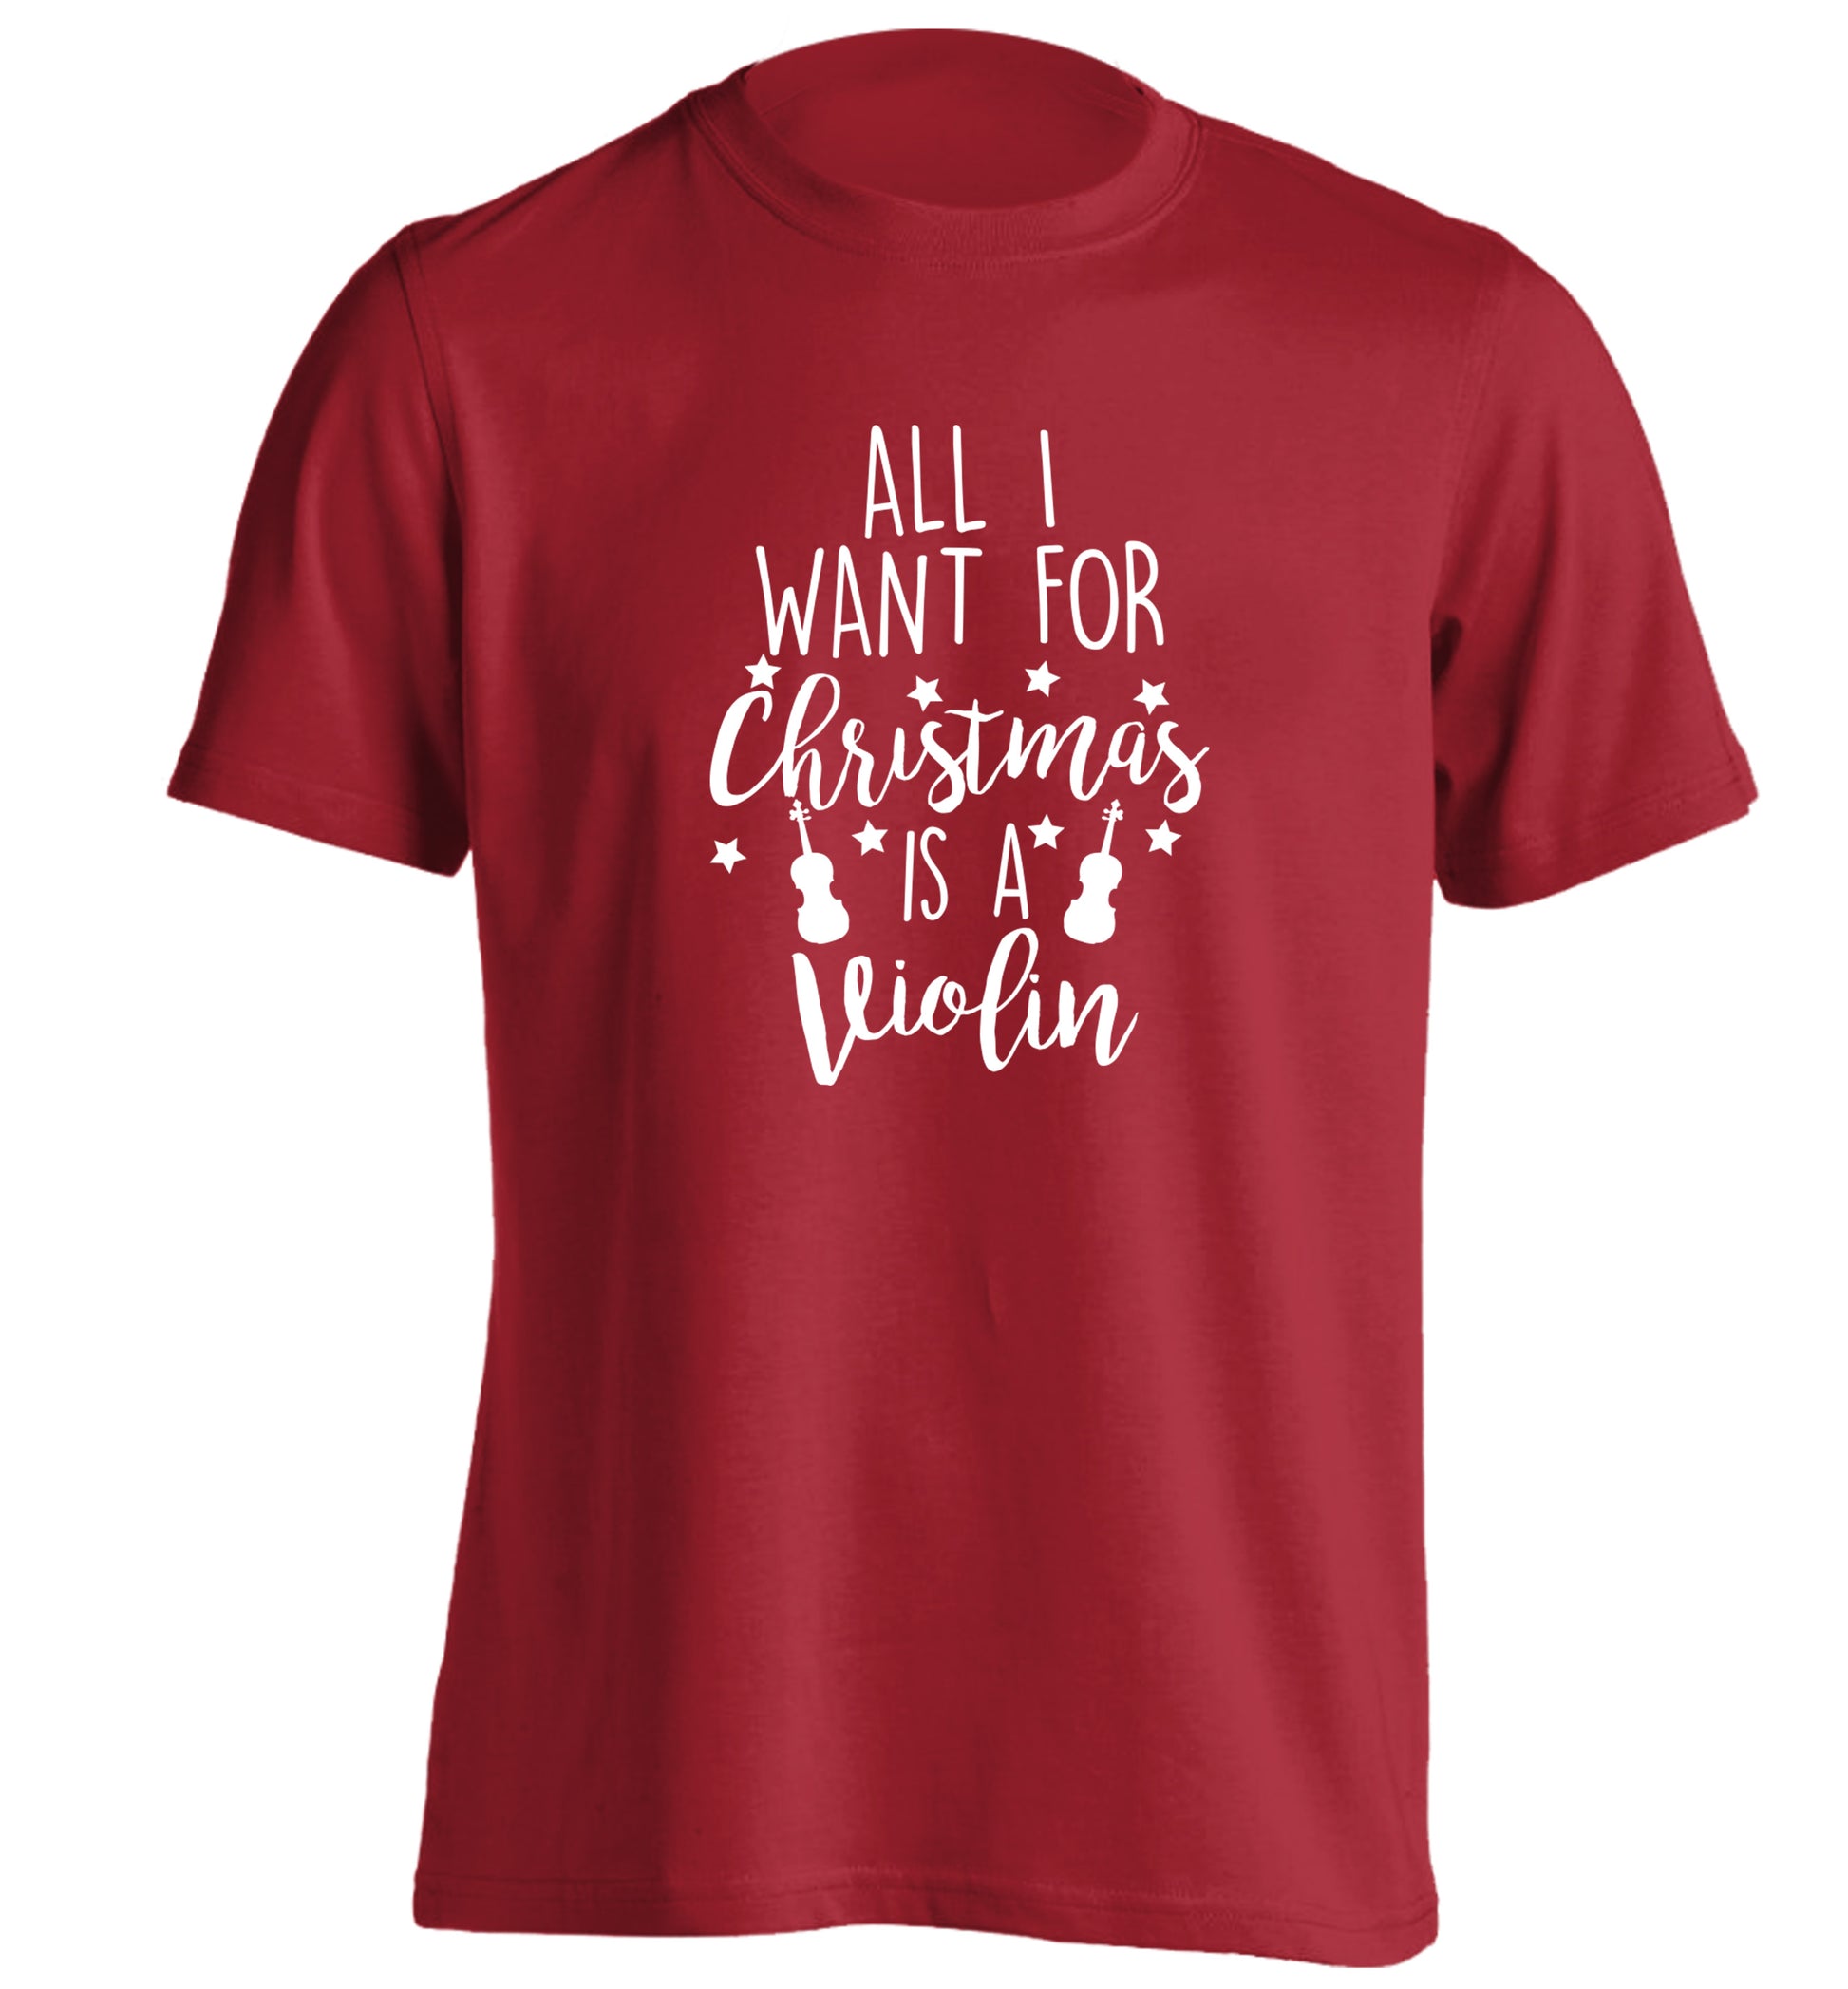 All I Want For Christmas is a Violin adults unisex red Tshirt 2XL